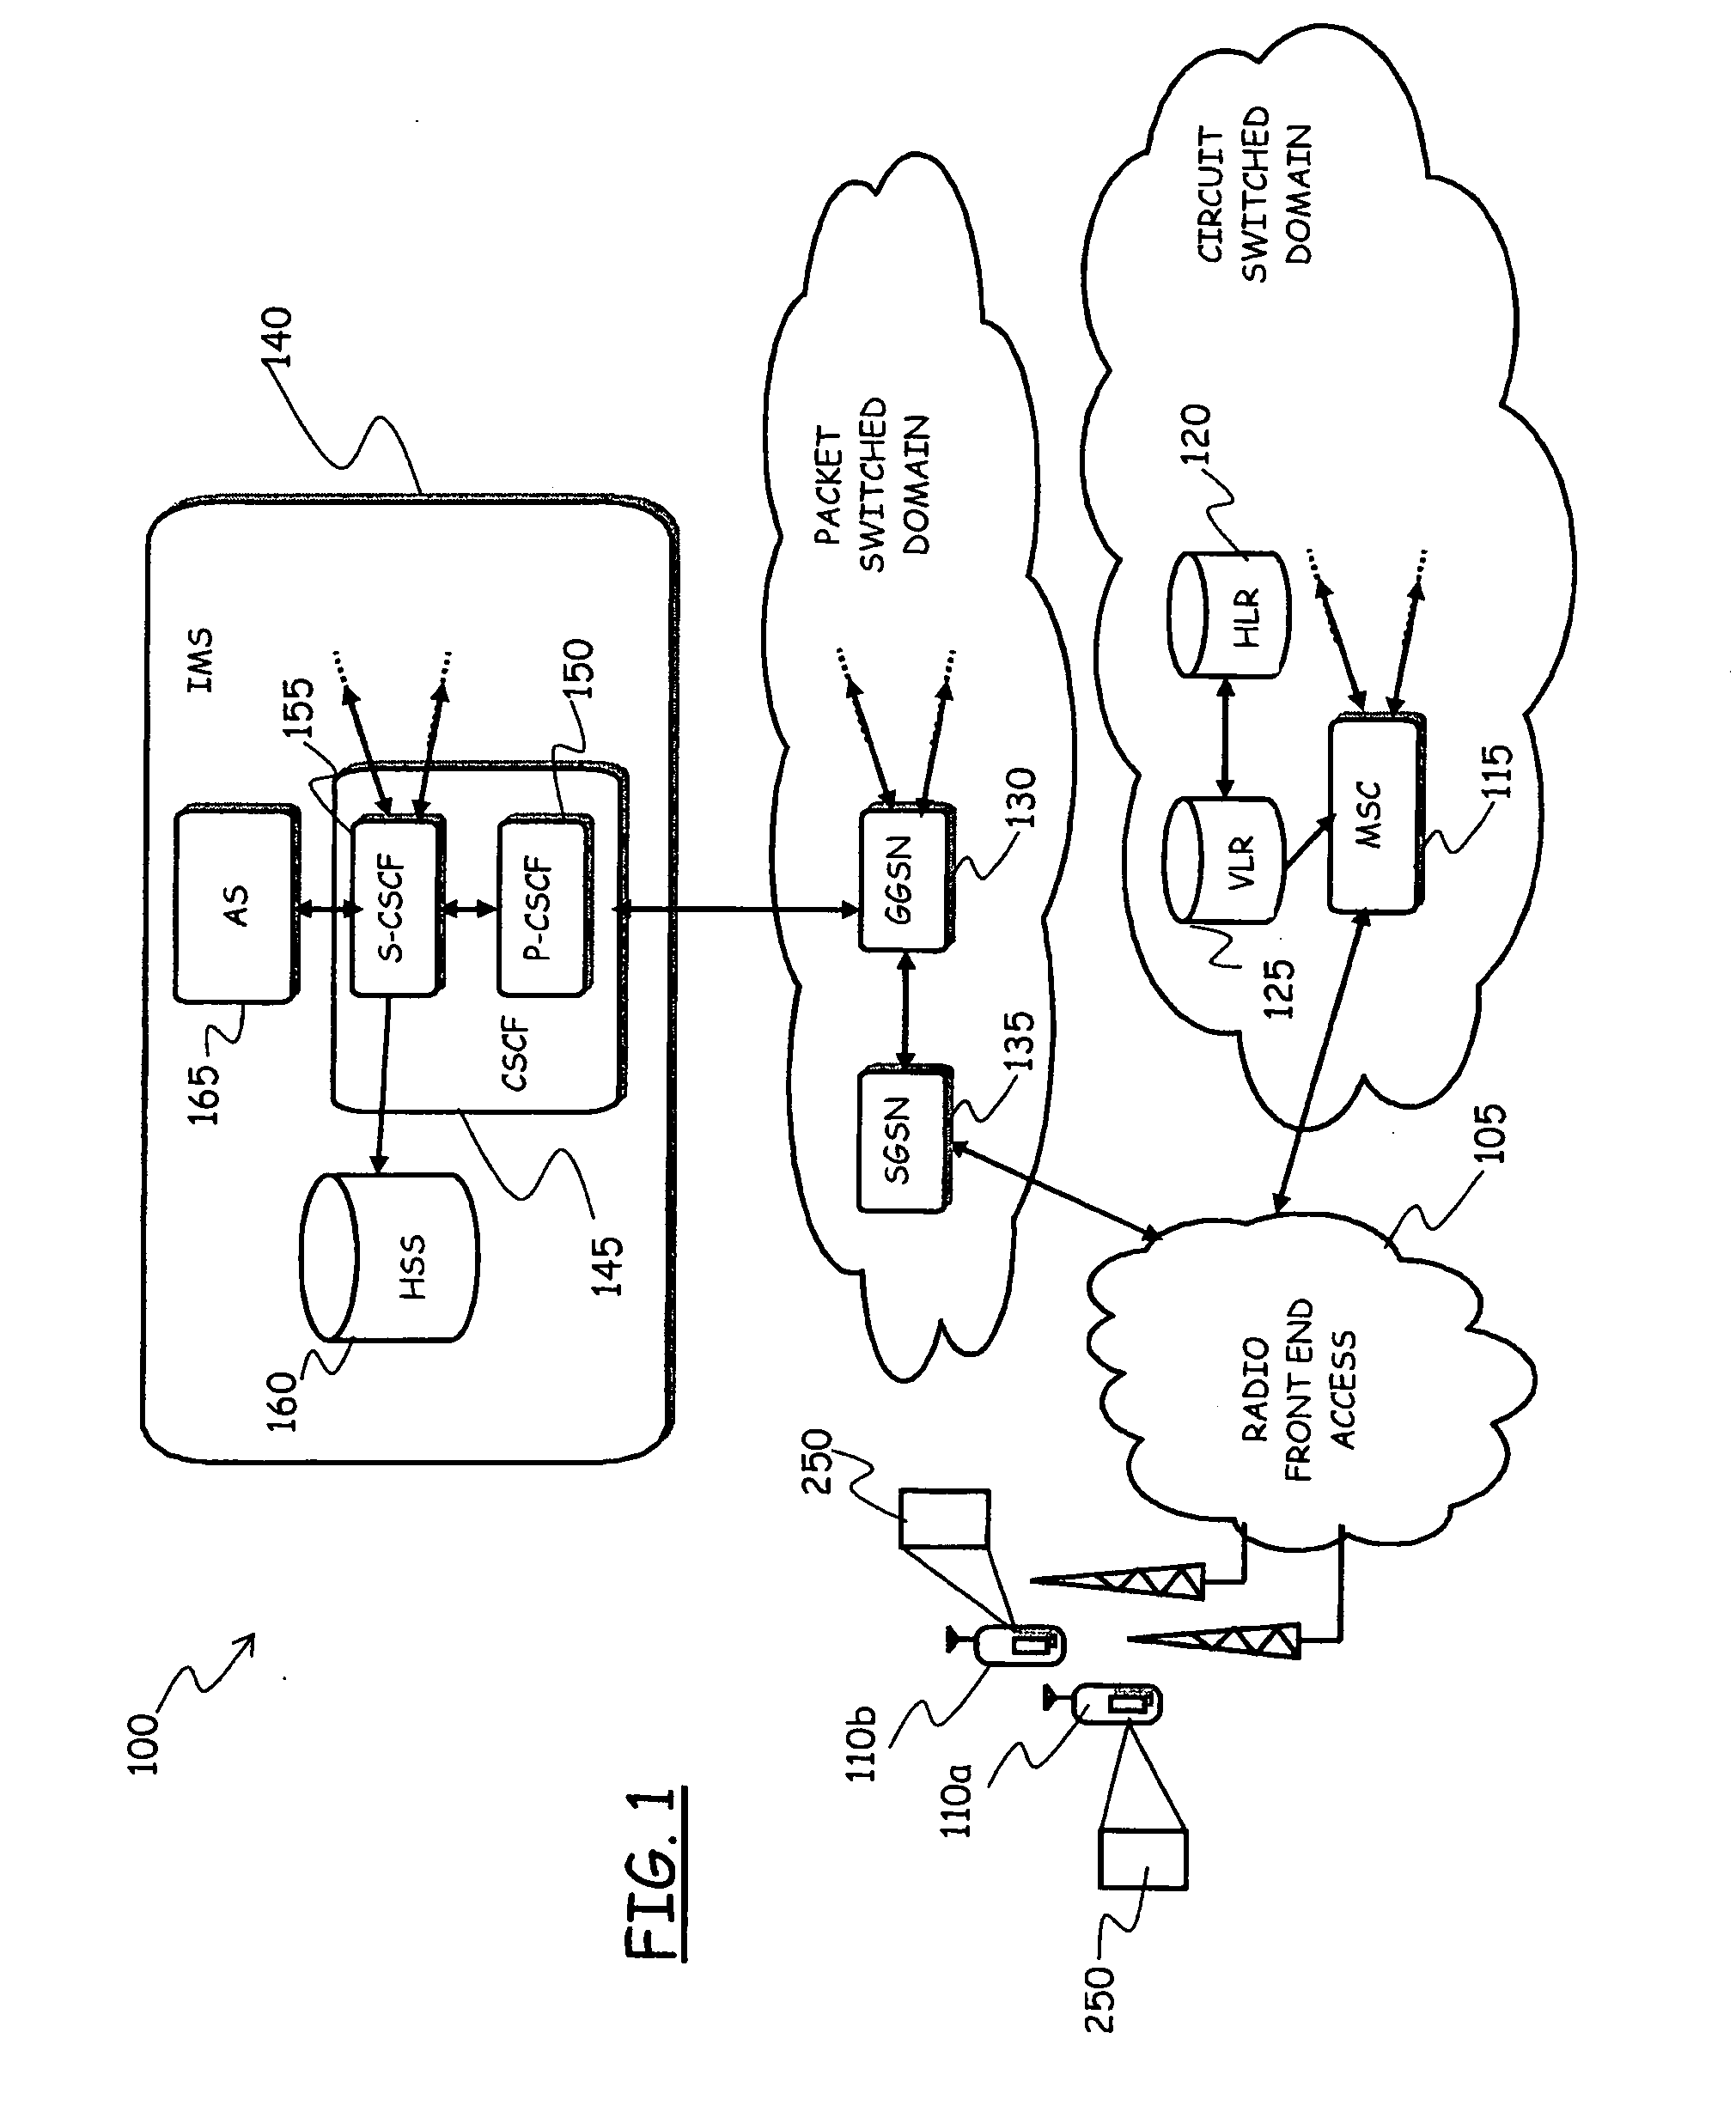 Method and System for Providing Presence Information